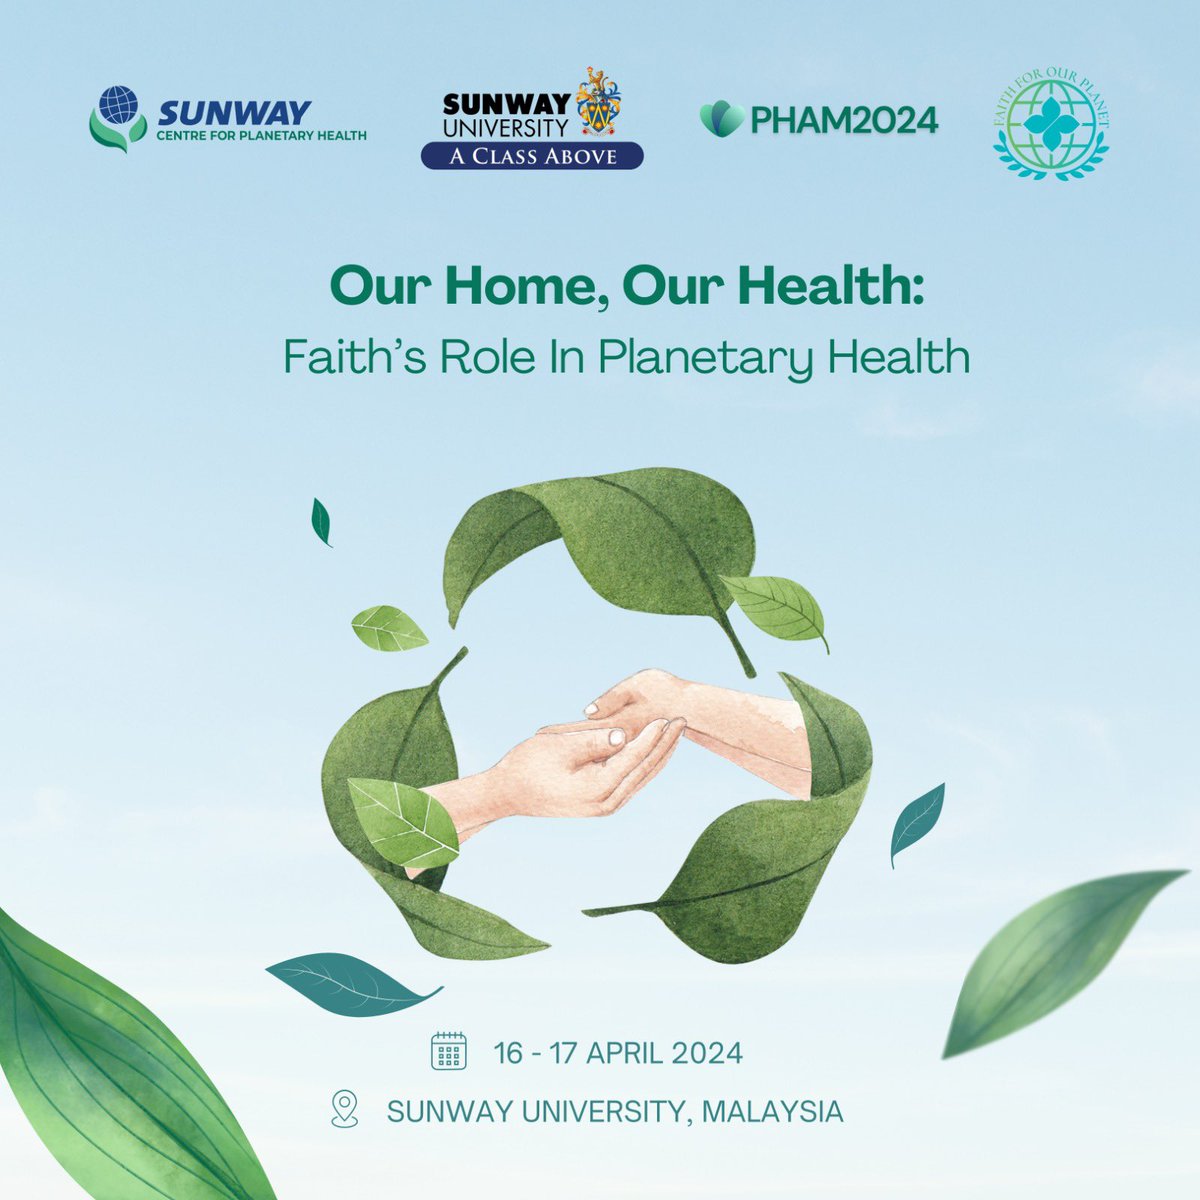 An imam, priest, monk, rabbi walk into the room. No it’s not a joke and really happening! Faith plays a huge role in behavioural change and how do we engage faith leaders on #planetaryhealth? Happening at #PHAM2024 summit 16-17 April @SunwayCPH @SunwayU @ph_alliance @FFOP_org